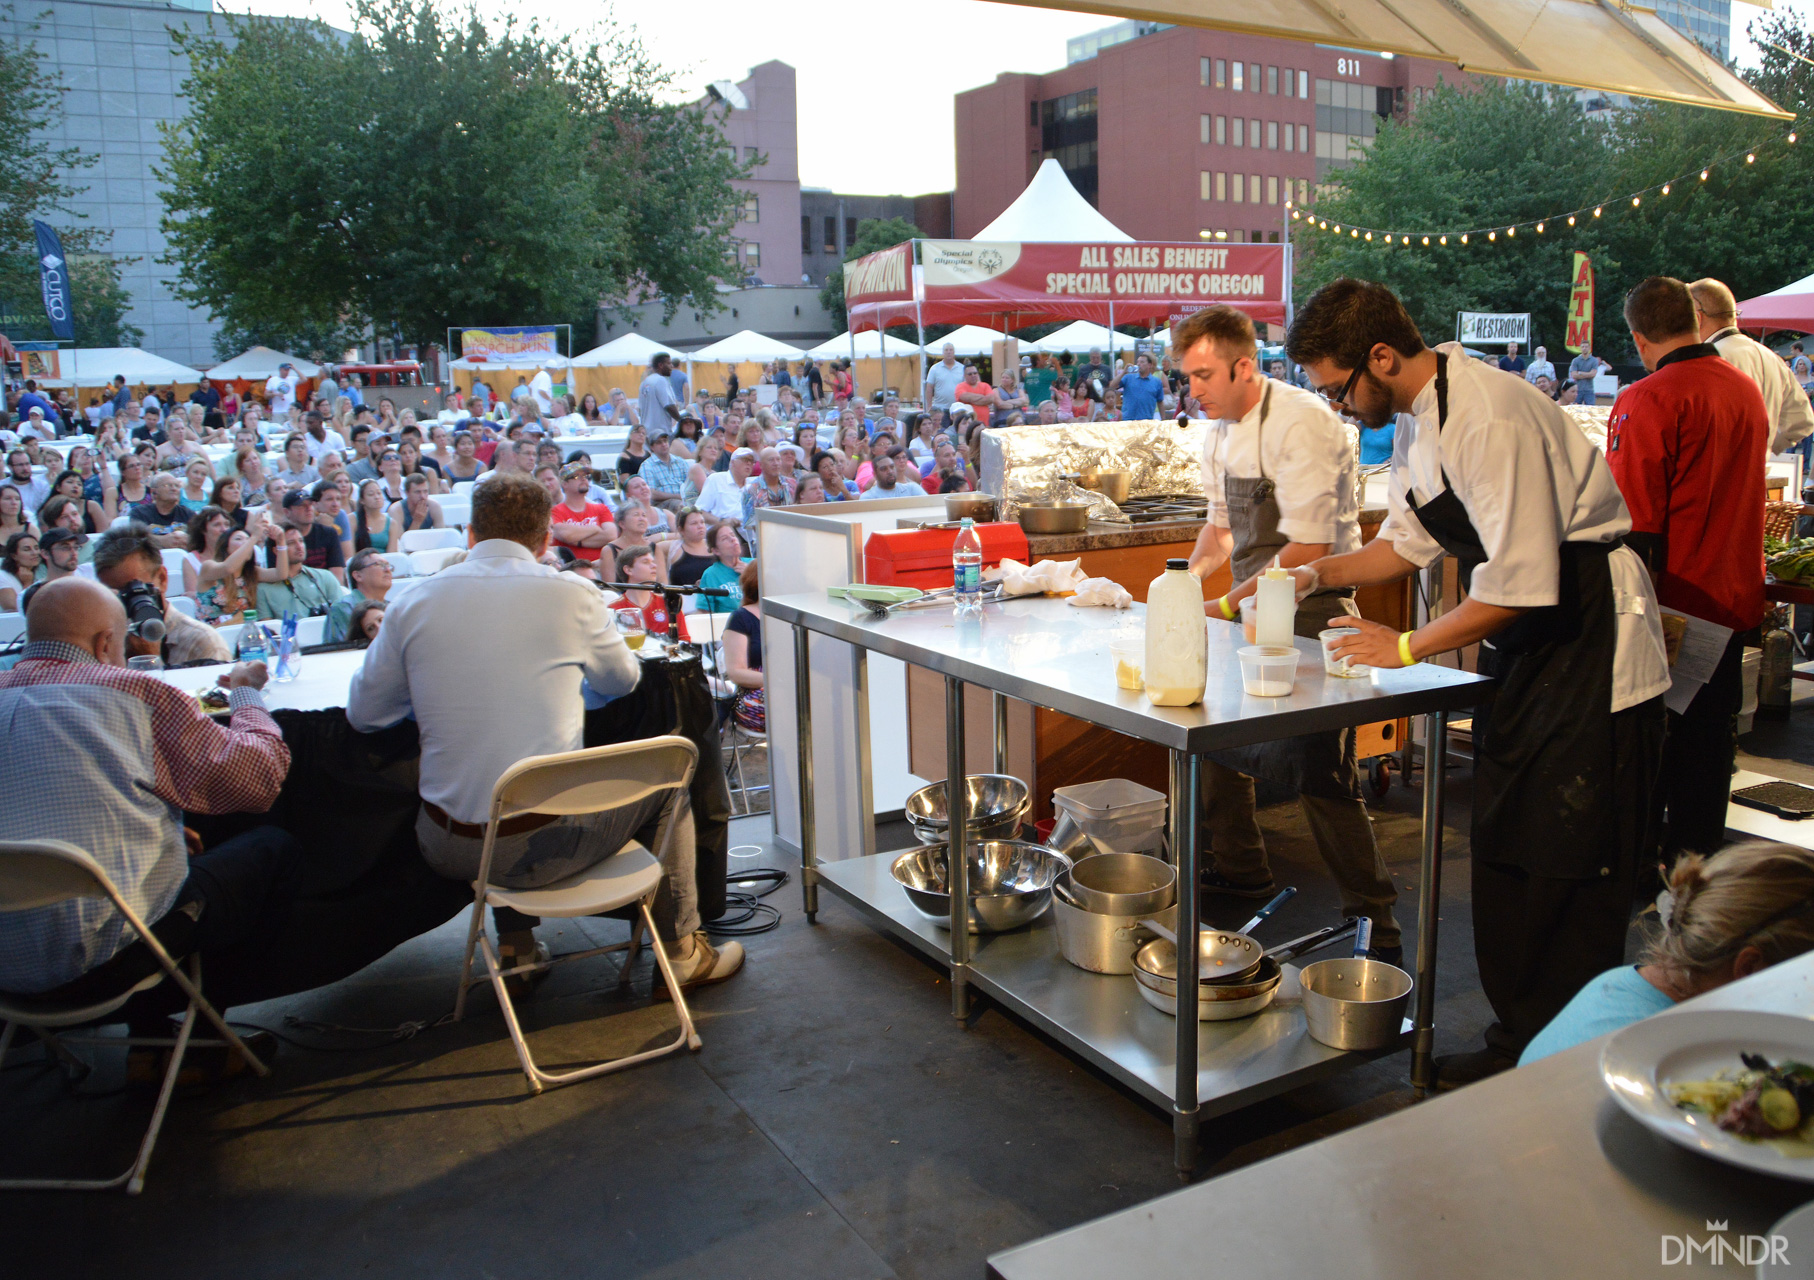 Oregon Iron Chef Competition winners at work looking out at the crowd